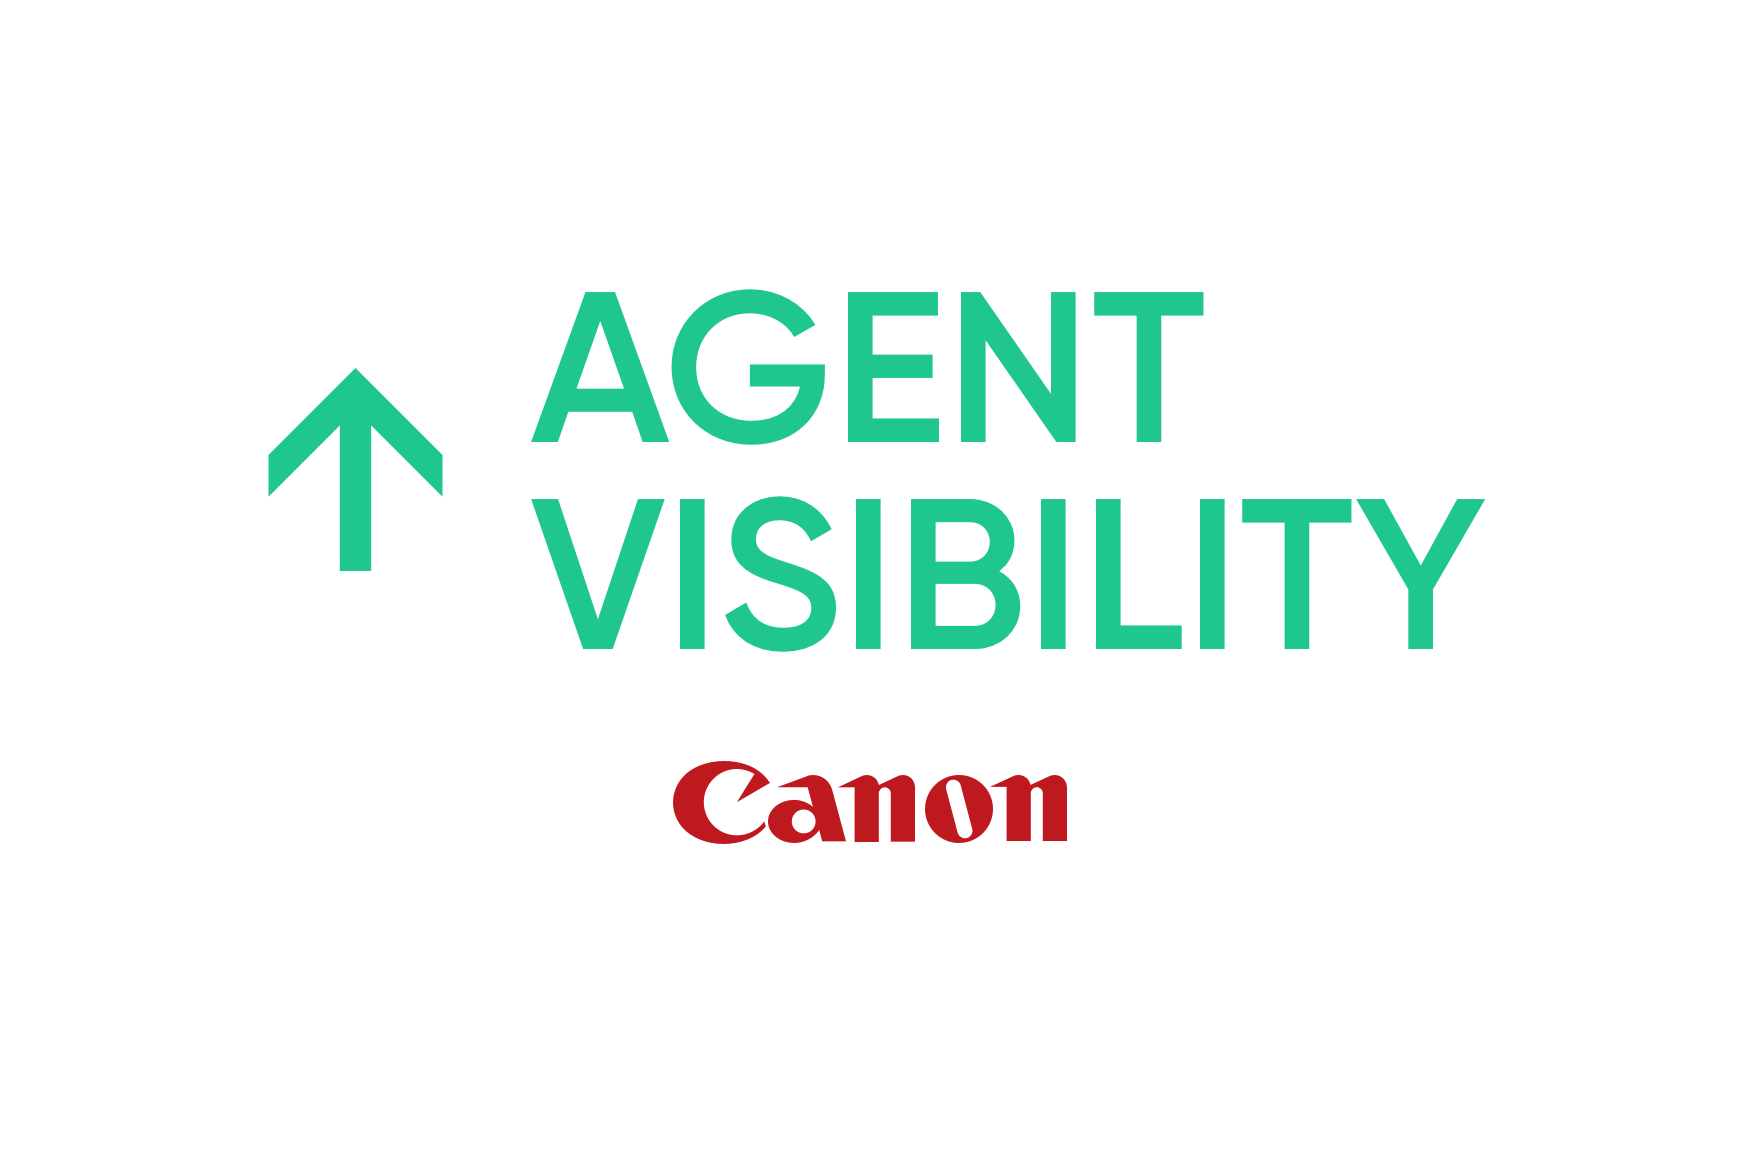 Canon: Improved agent productivity and visibility